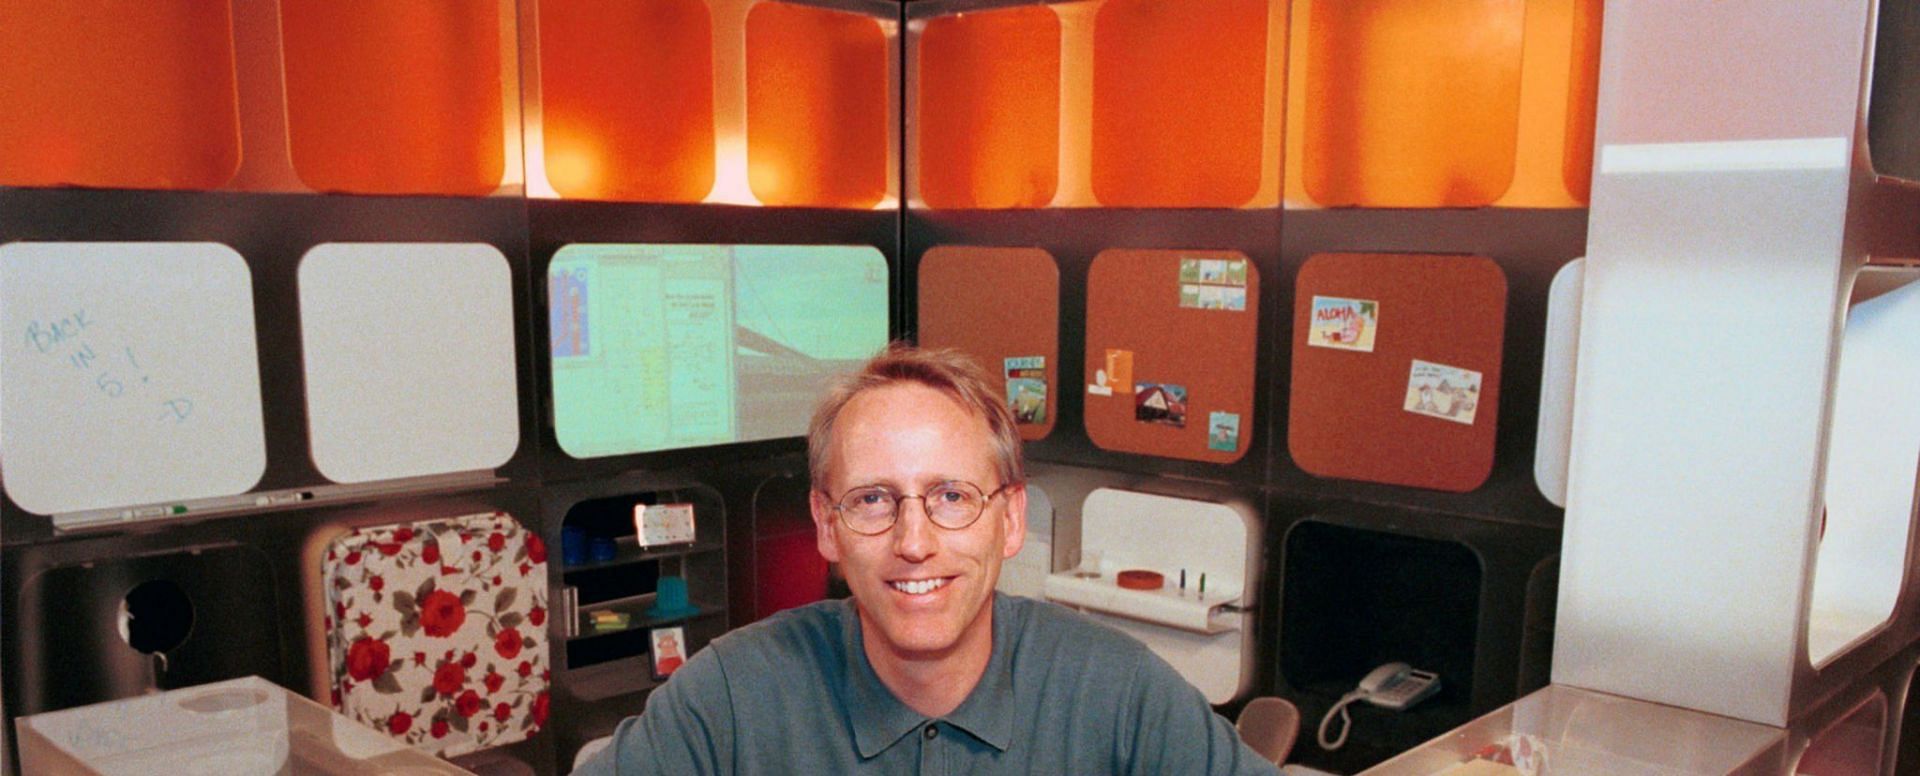 Scott Adams is an American cartoonist and author (Image via Getty Images)